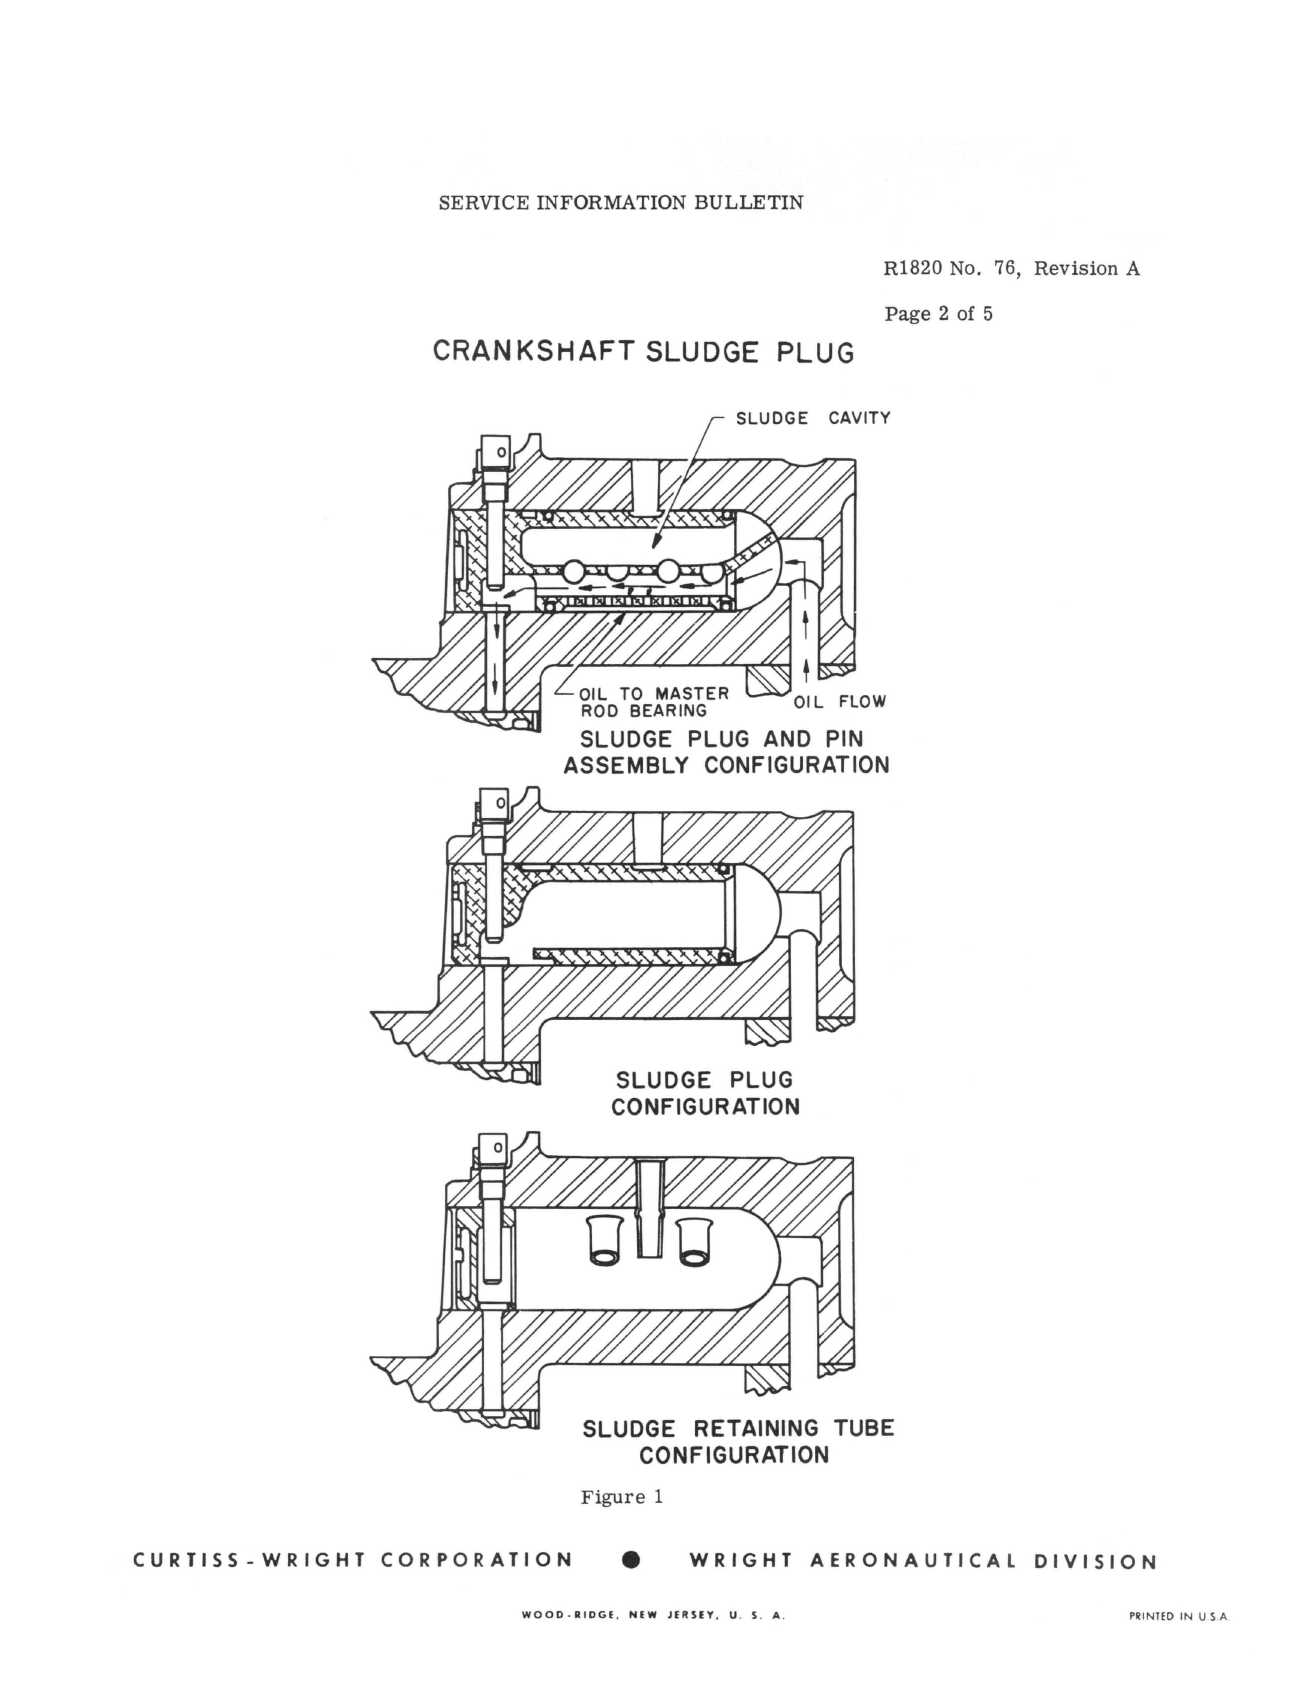 Sample page 2 from AirCorps Library document: Provision for Crankshaft Crankpin Sludge Retaining Plug & Pin Assembly